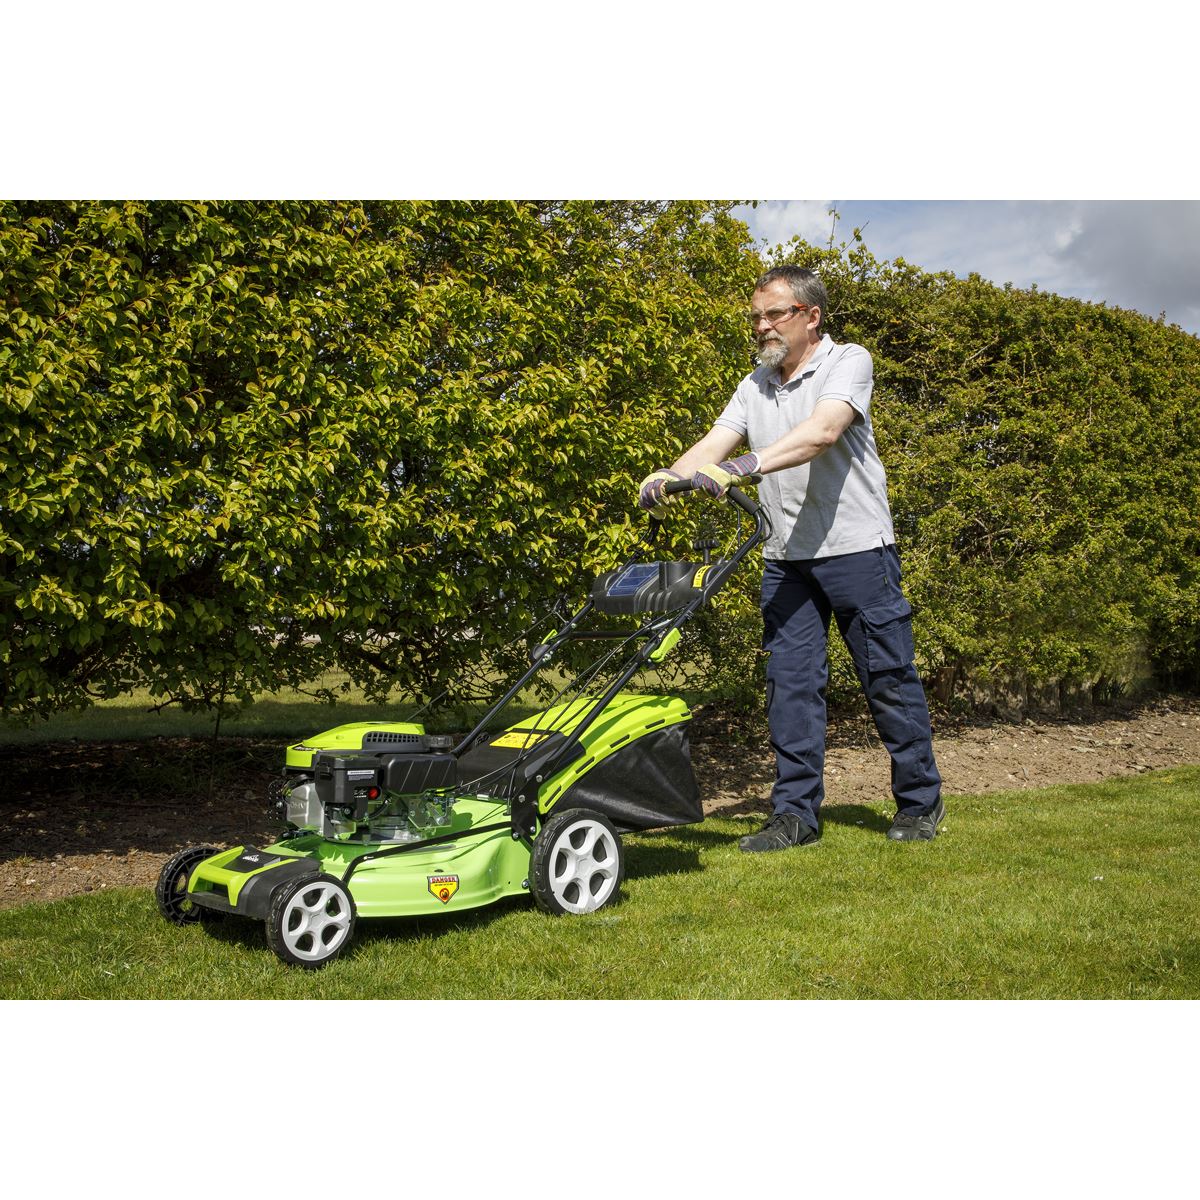 Dellonda Self-Propelled Petrol Lawnmower Grass Cutter with Height Adjustment & Grass Bag 149cc 18"/46cm 4-Stroke Engine